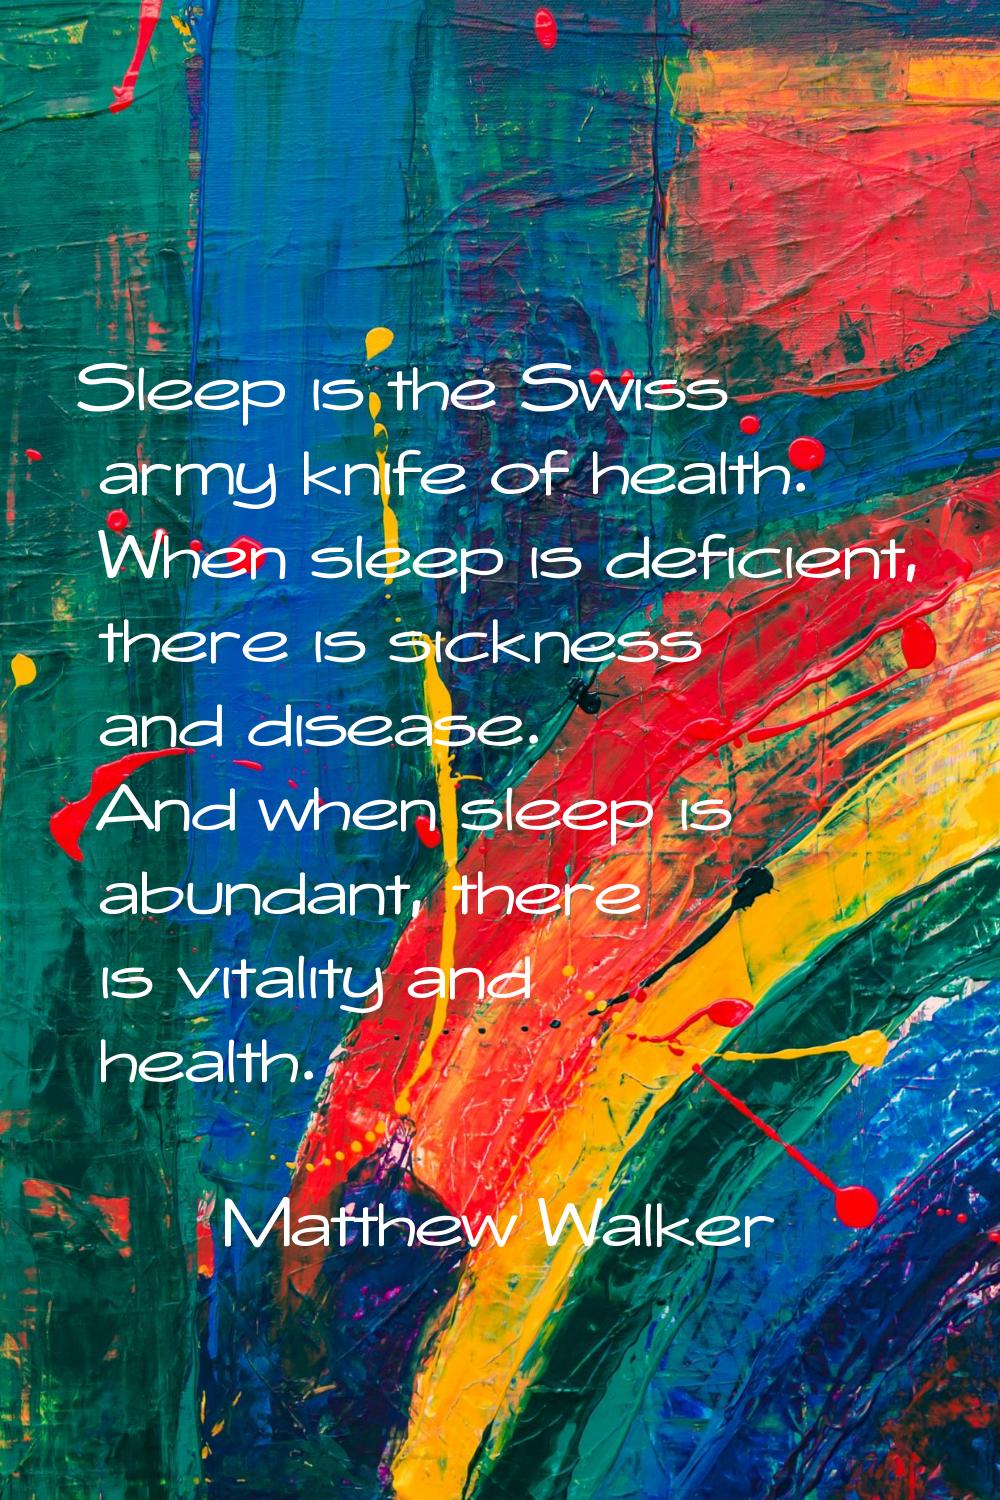 Sleep is the Swiss army knife of health. When sleep is deficient, there is sickness and disease. An